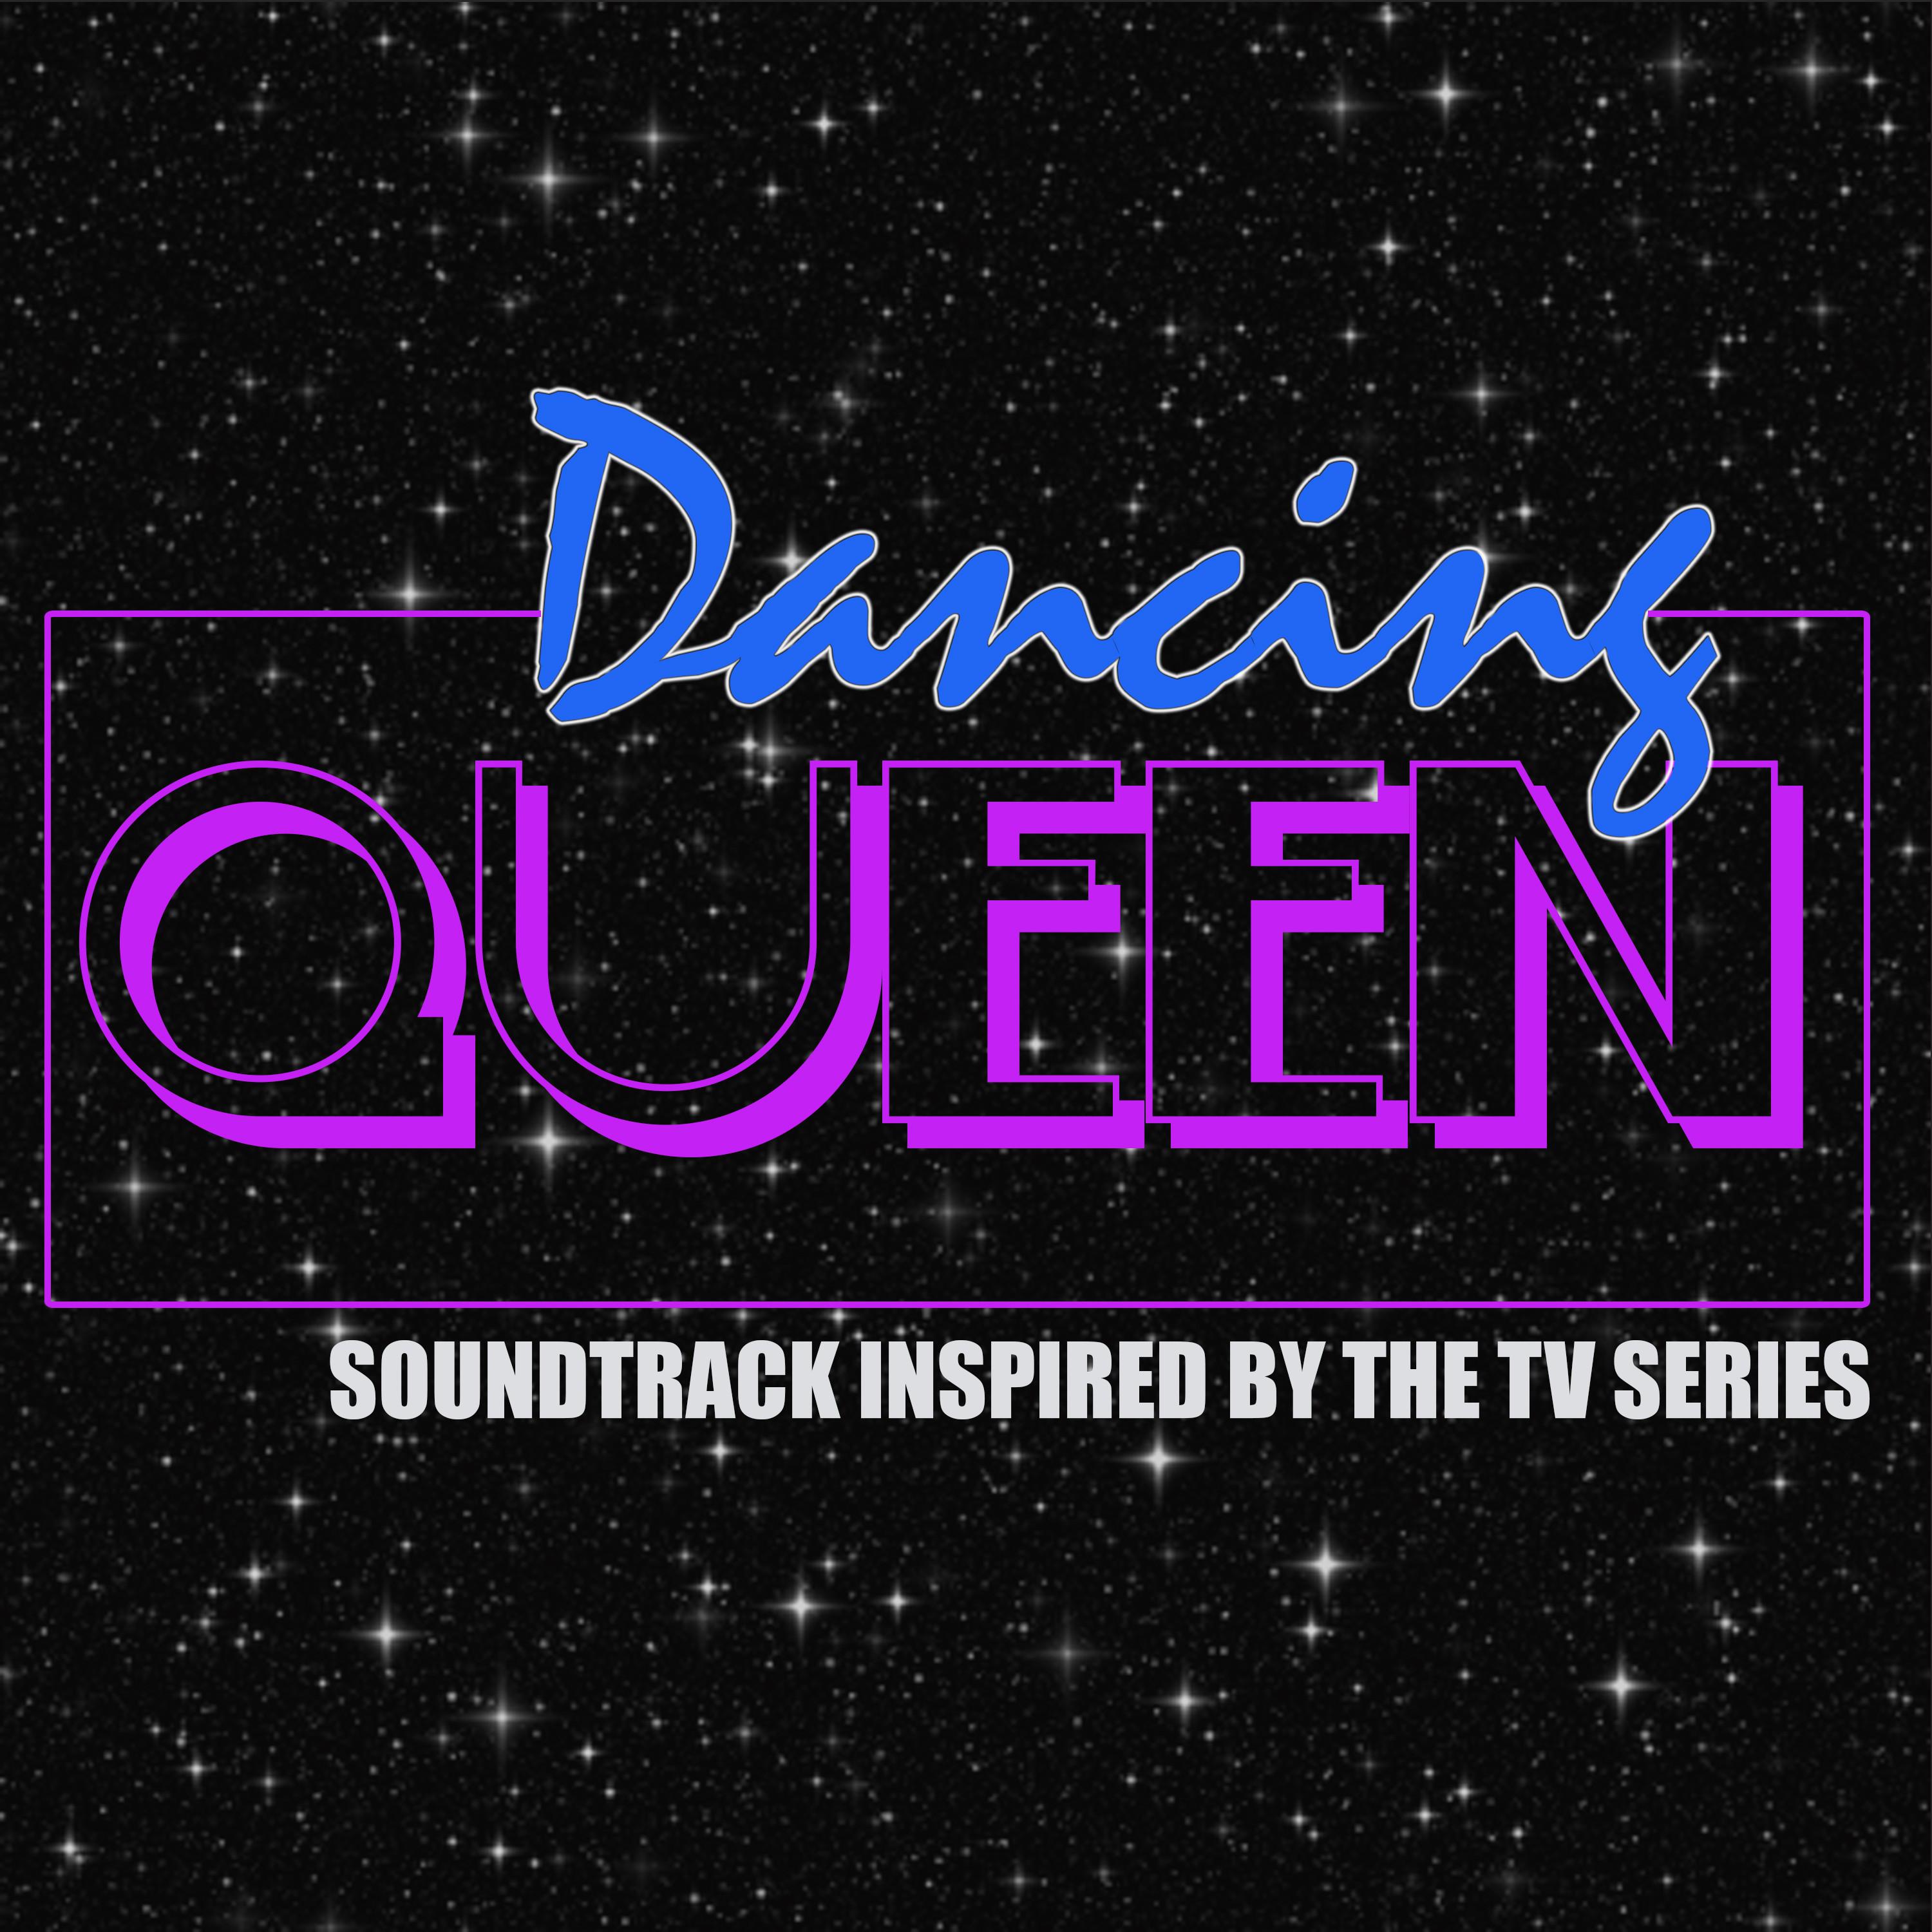 Dancing Queen (Soundtrack Inspired by the TV Series)